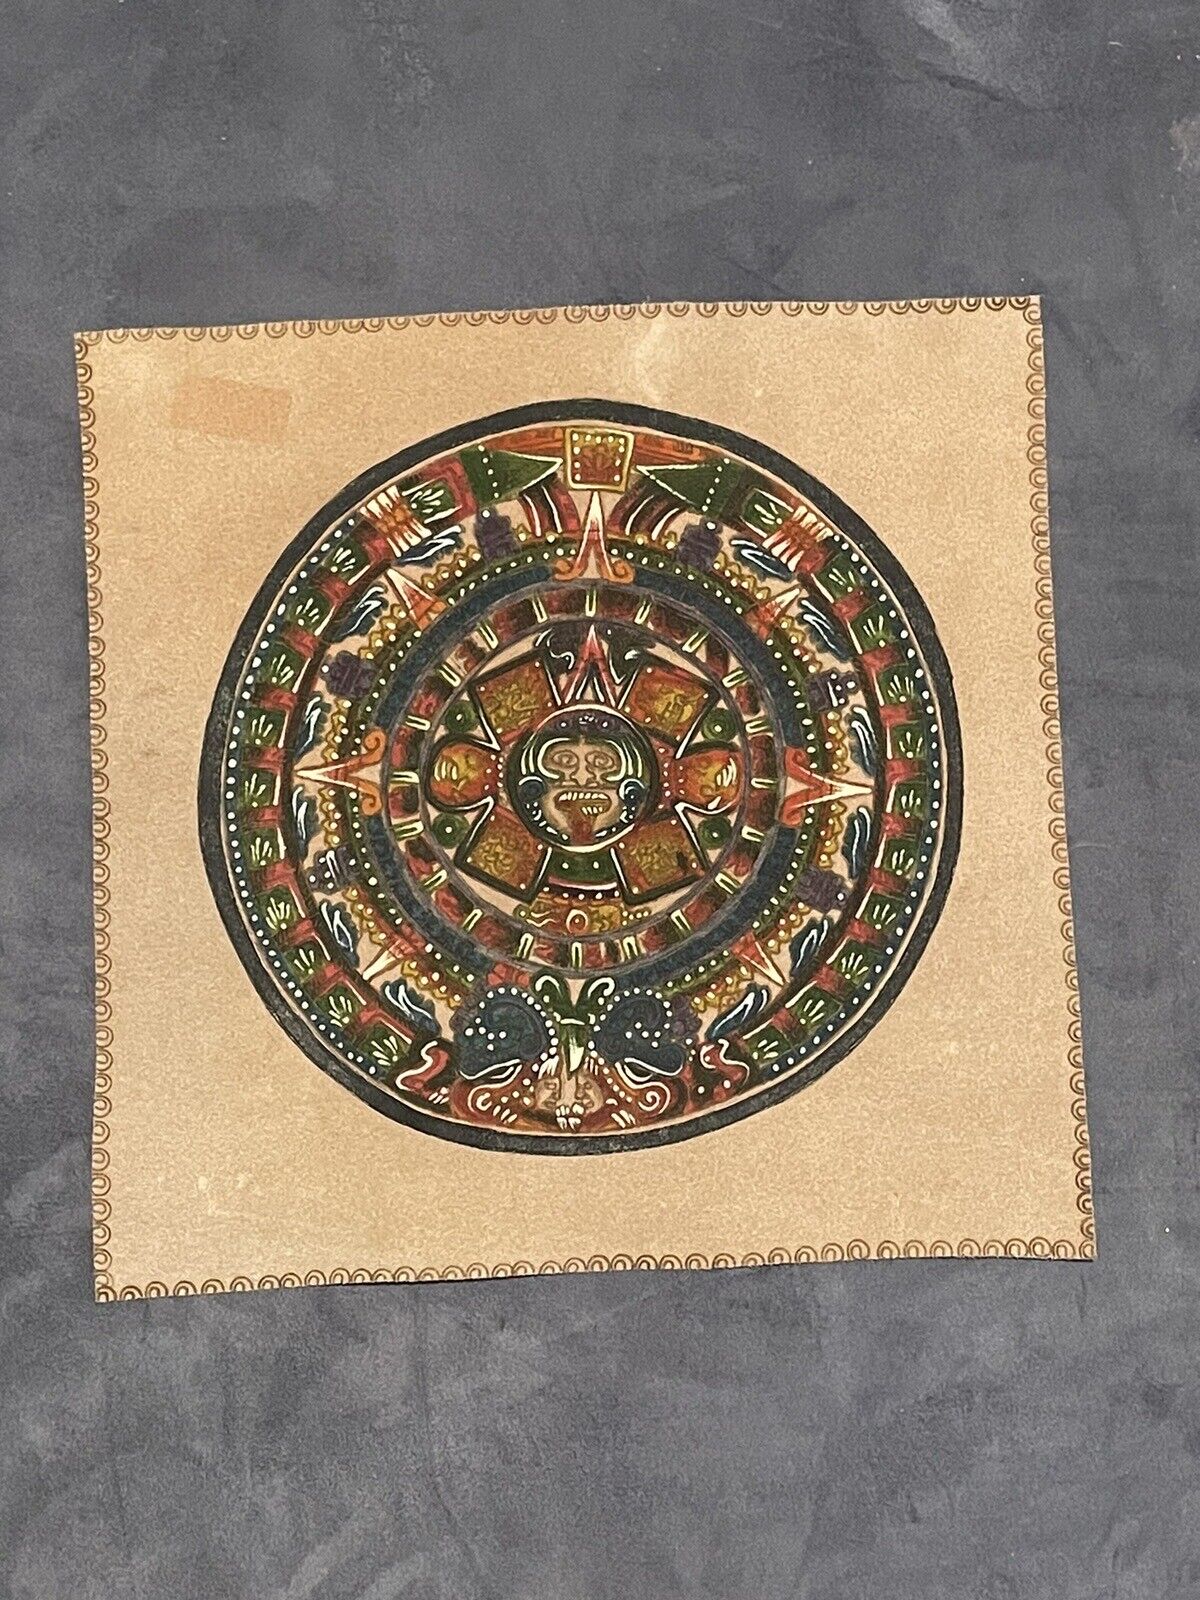 Aztec Calendar  Sun Stone on Leather Cloth Hand Painted Mayan Hammered